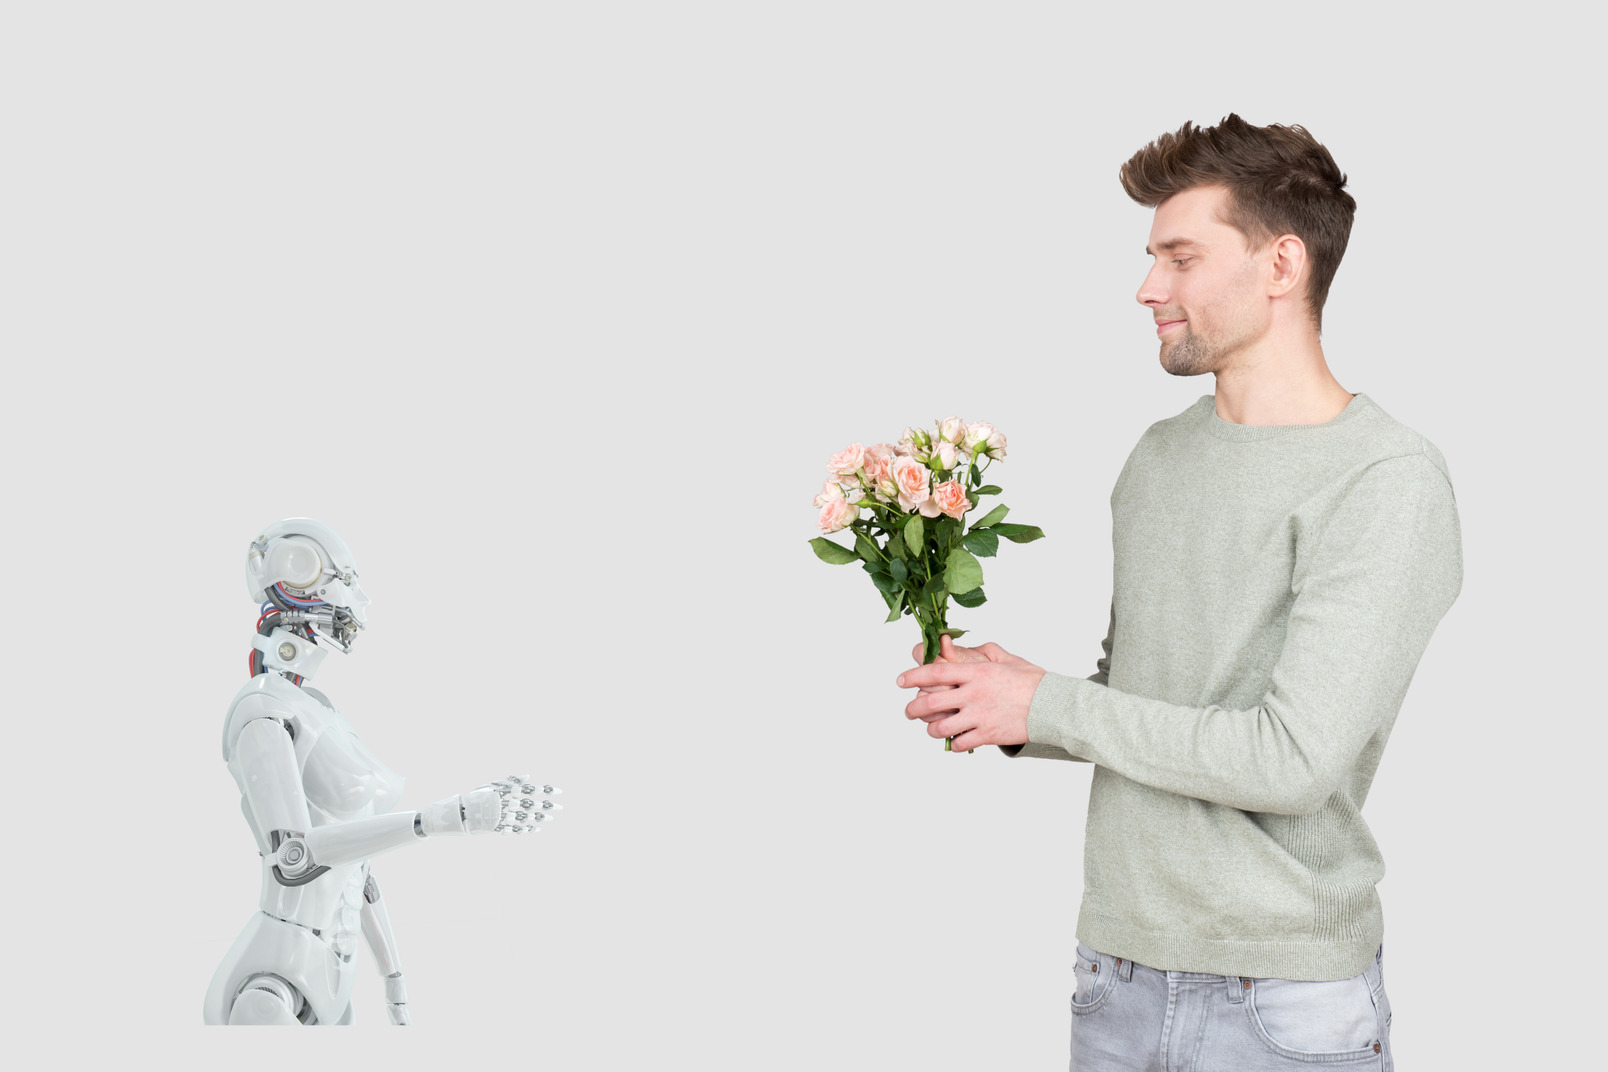 Man holding a bunch of flowers